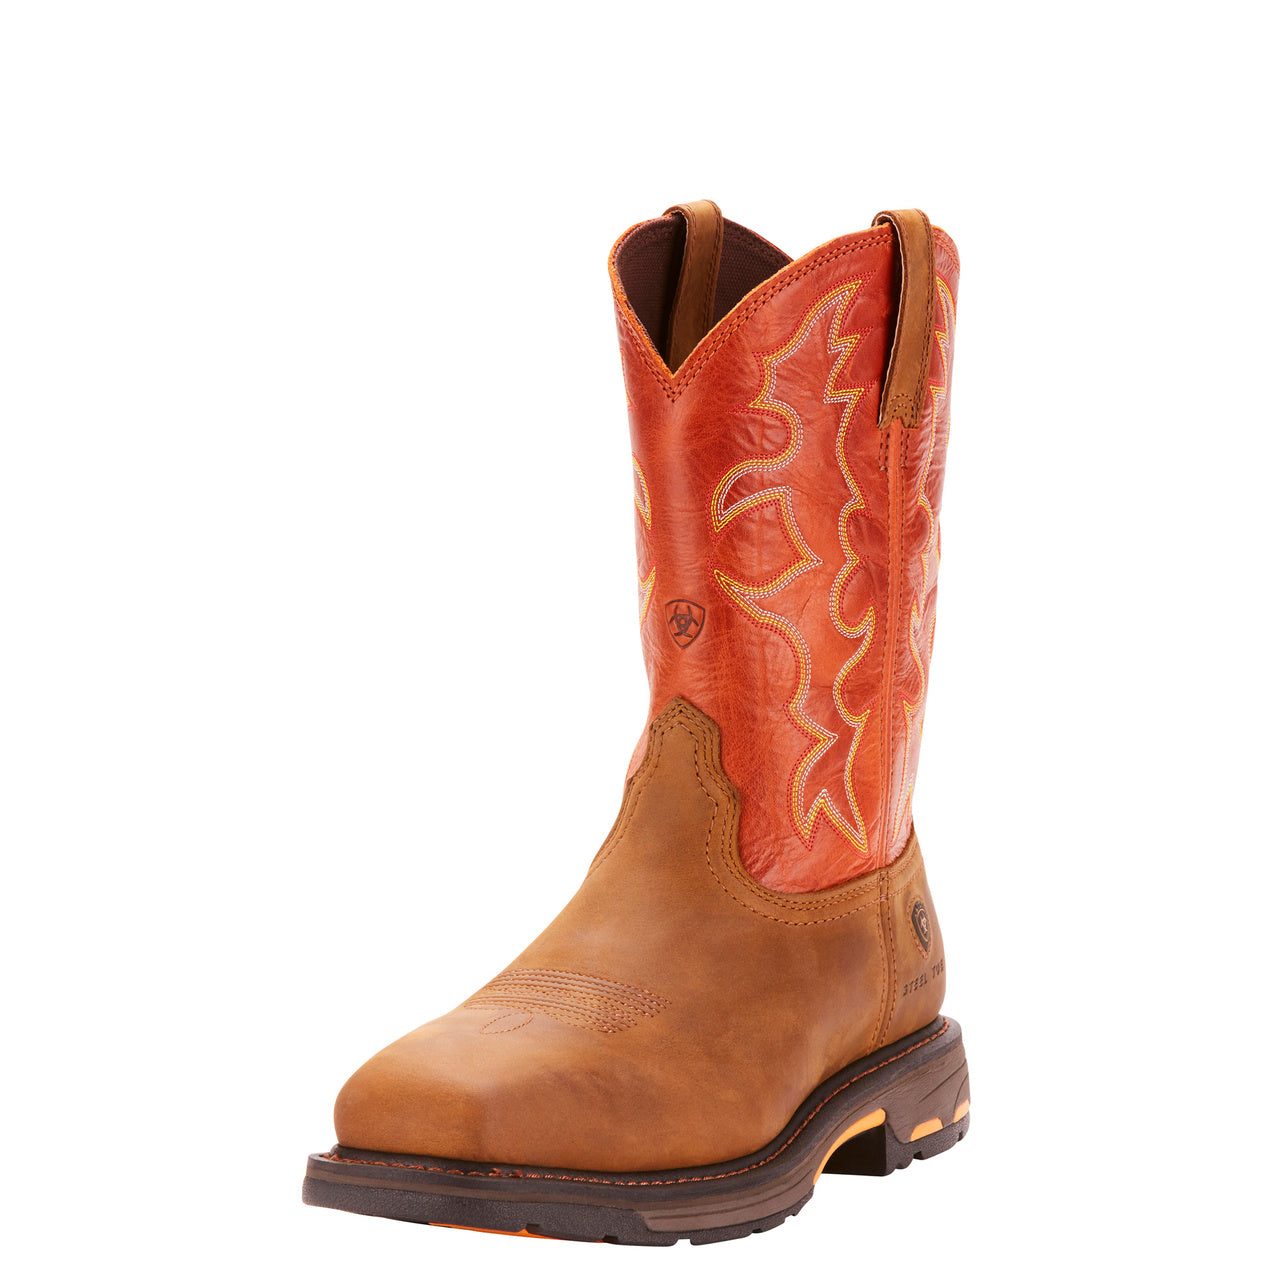 Ariat Workhog Wide Square Toe Boot 7 D